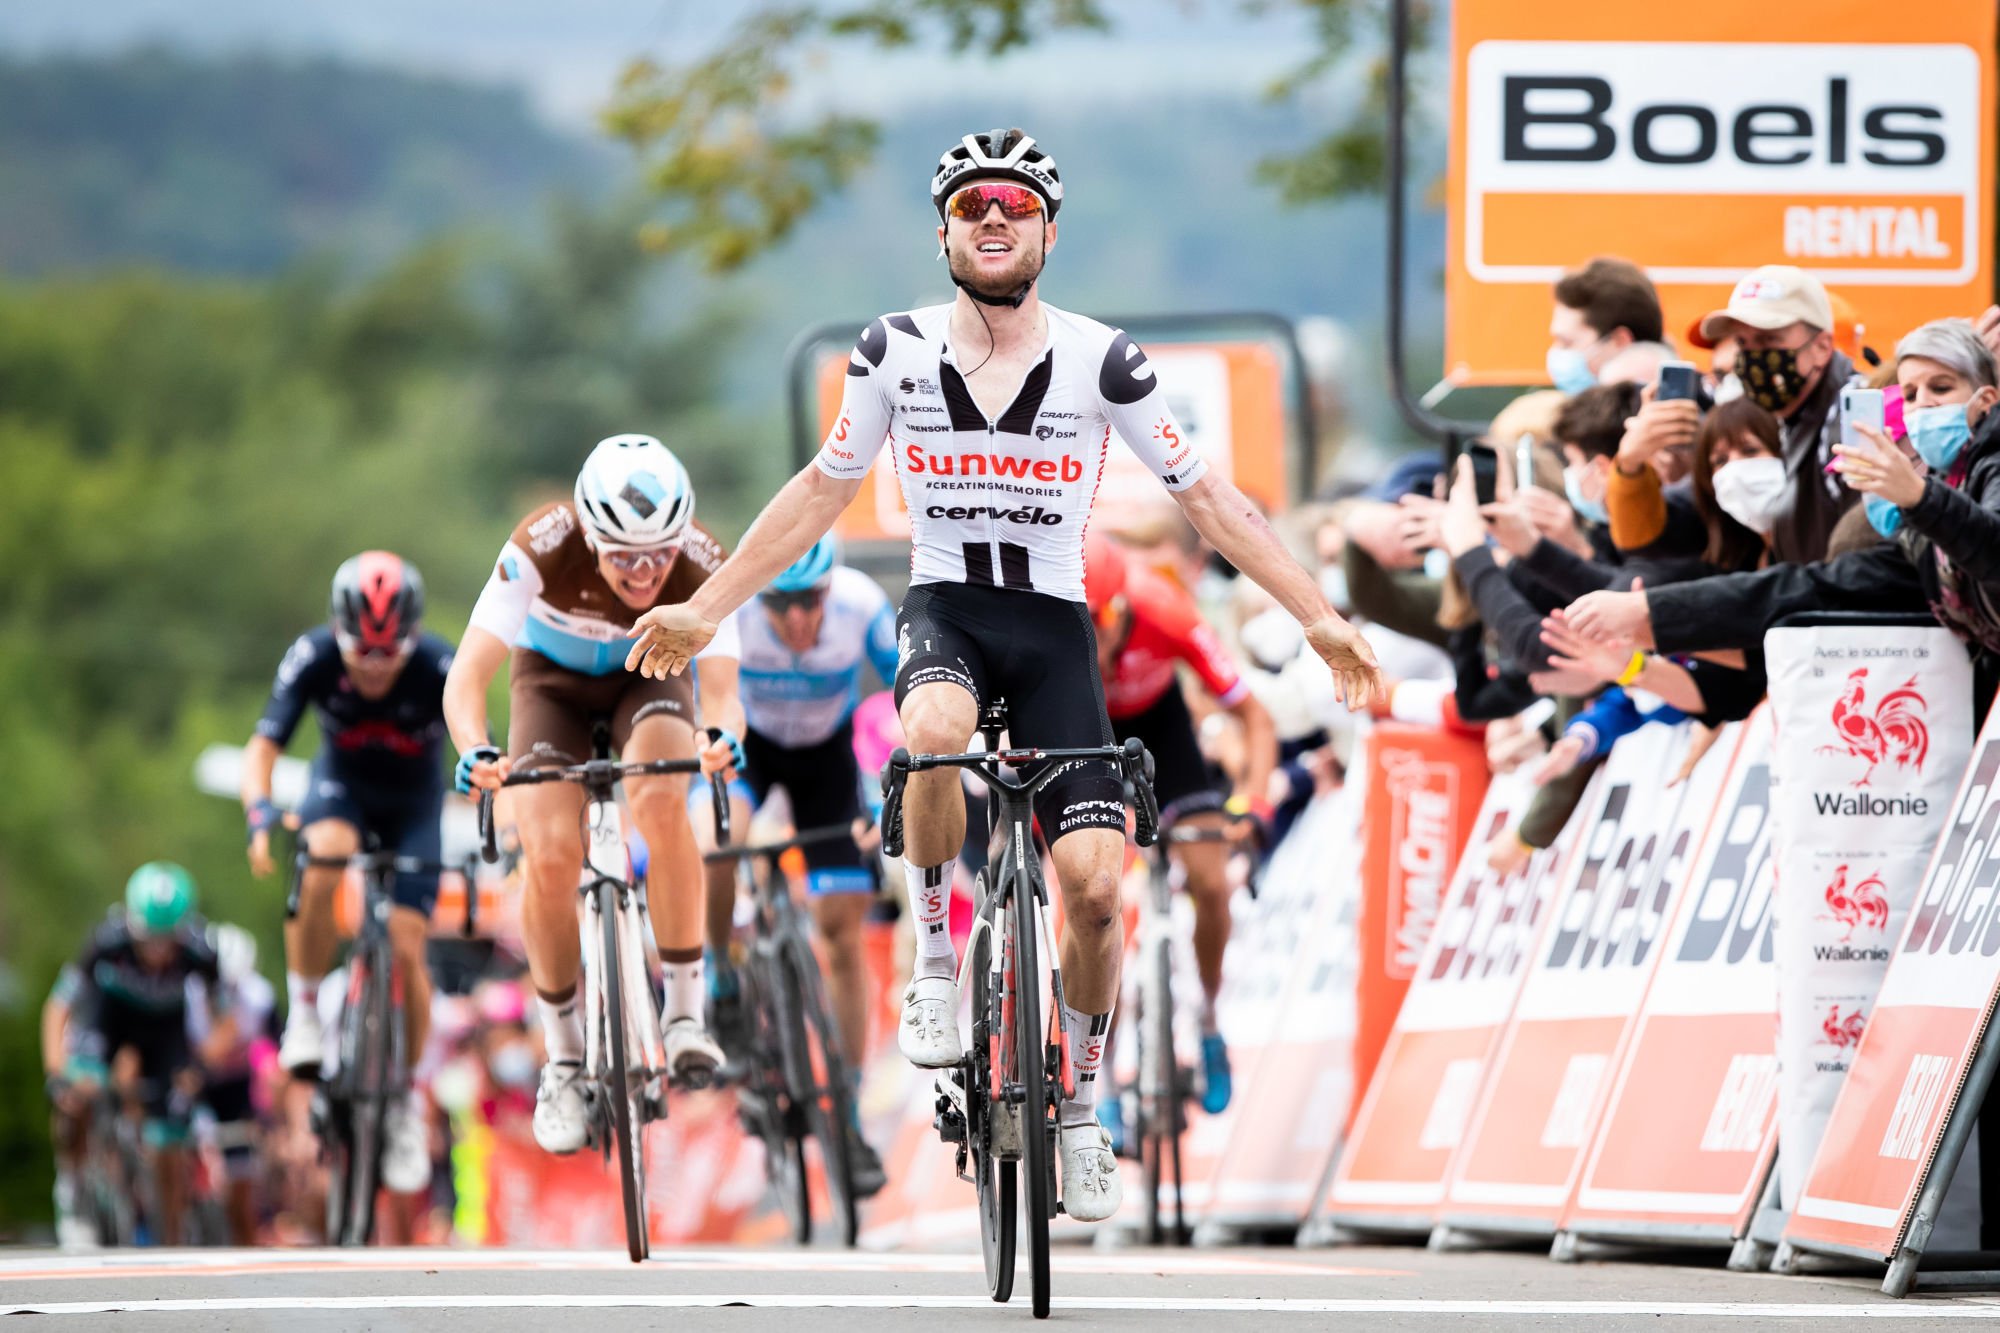 Swiss Marc Hirschi of Team Sunweb celebrates as he crosses the finish line to win the 84th edition of the men's race of 'La Fleche Wallonne', a one day cycling race (Waalse Pijl - Walloon Arrow), 220km from Ans to Huy, Wednesday 30 September 2020. This year's edition was postponed from April to September, due to the ongoing Coronavirus crisis. BELGA PHOTO KRISTOF VAN ACCOM 
By Icon Sport